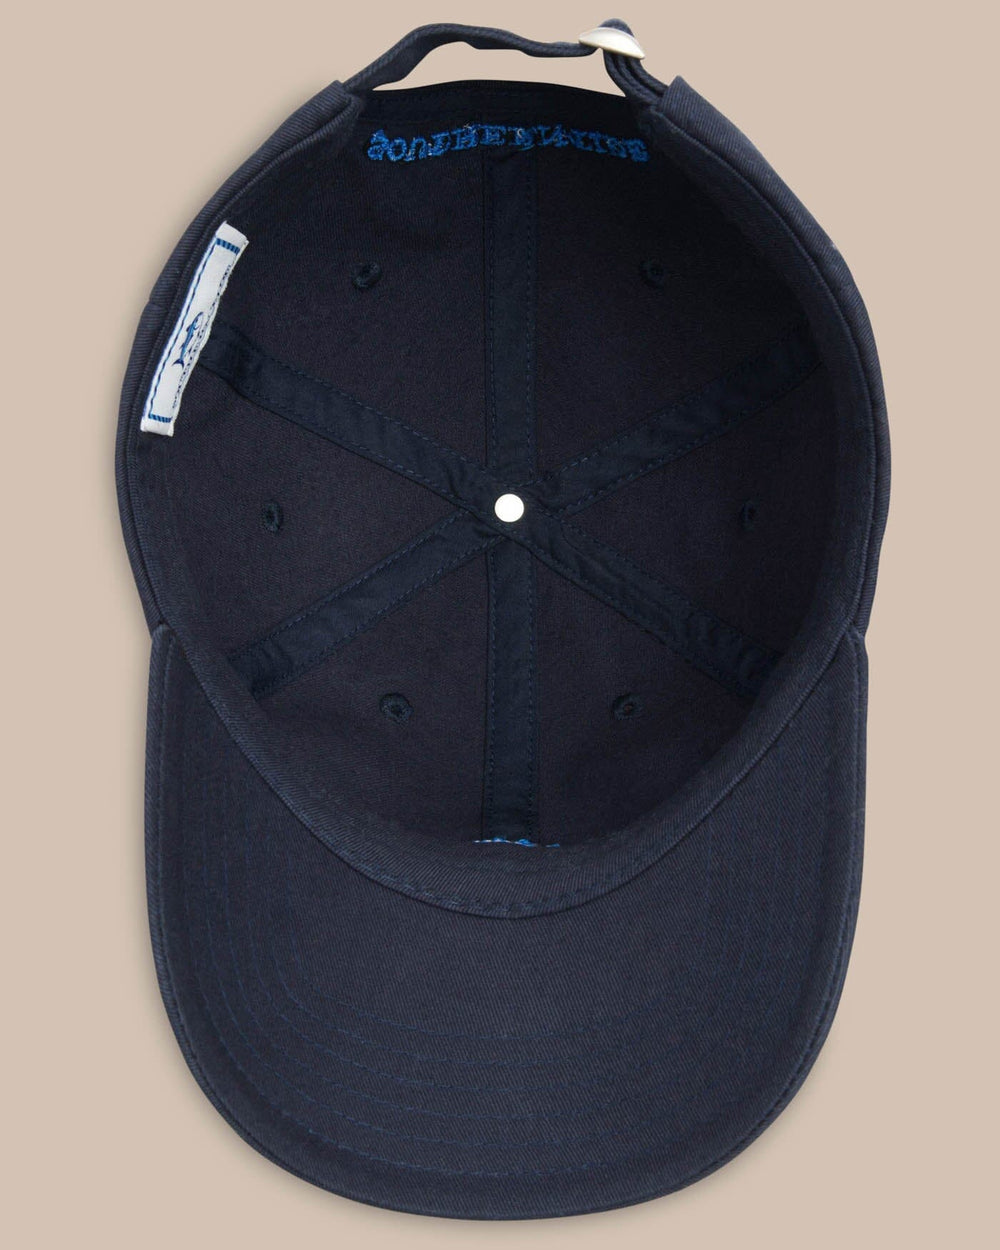 The inside of the Skipjack Hat by Southern Tide - Navy